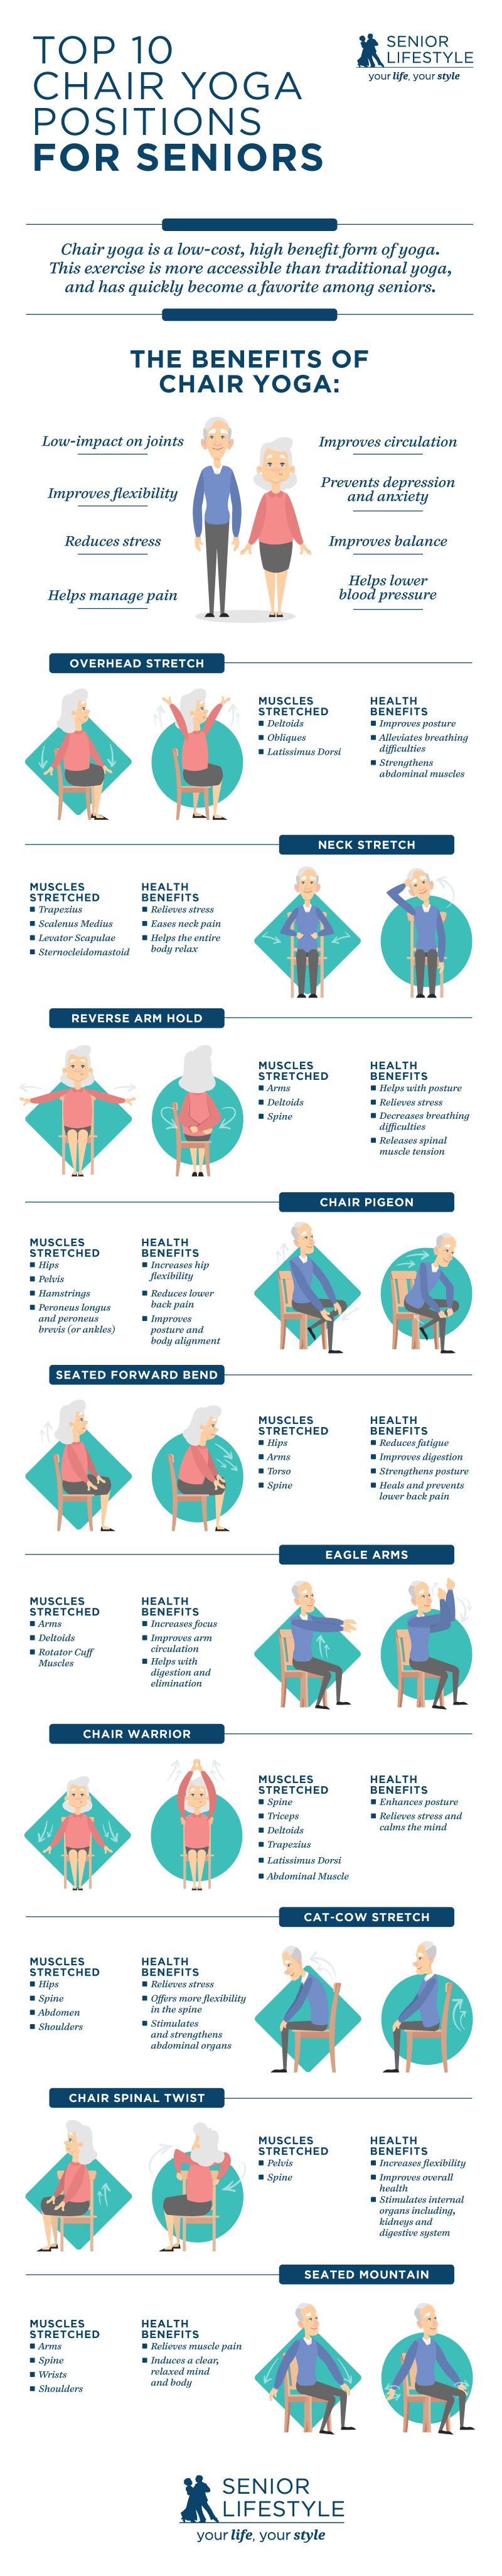 Top 10 Chair Yoga Positions For Seniors Infographic